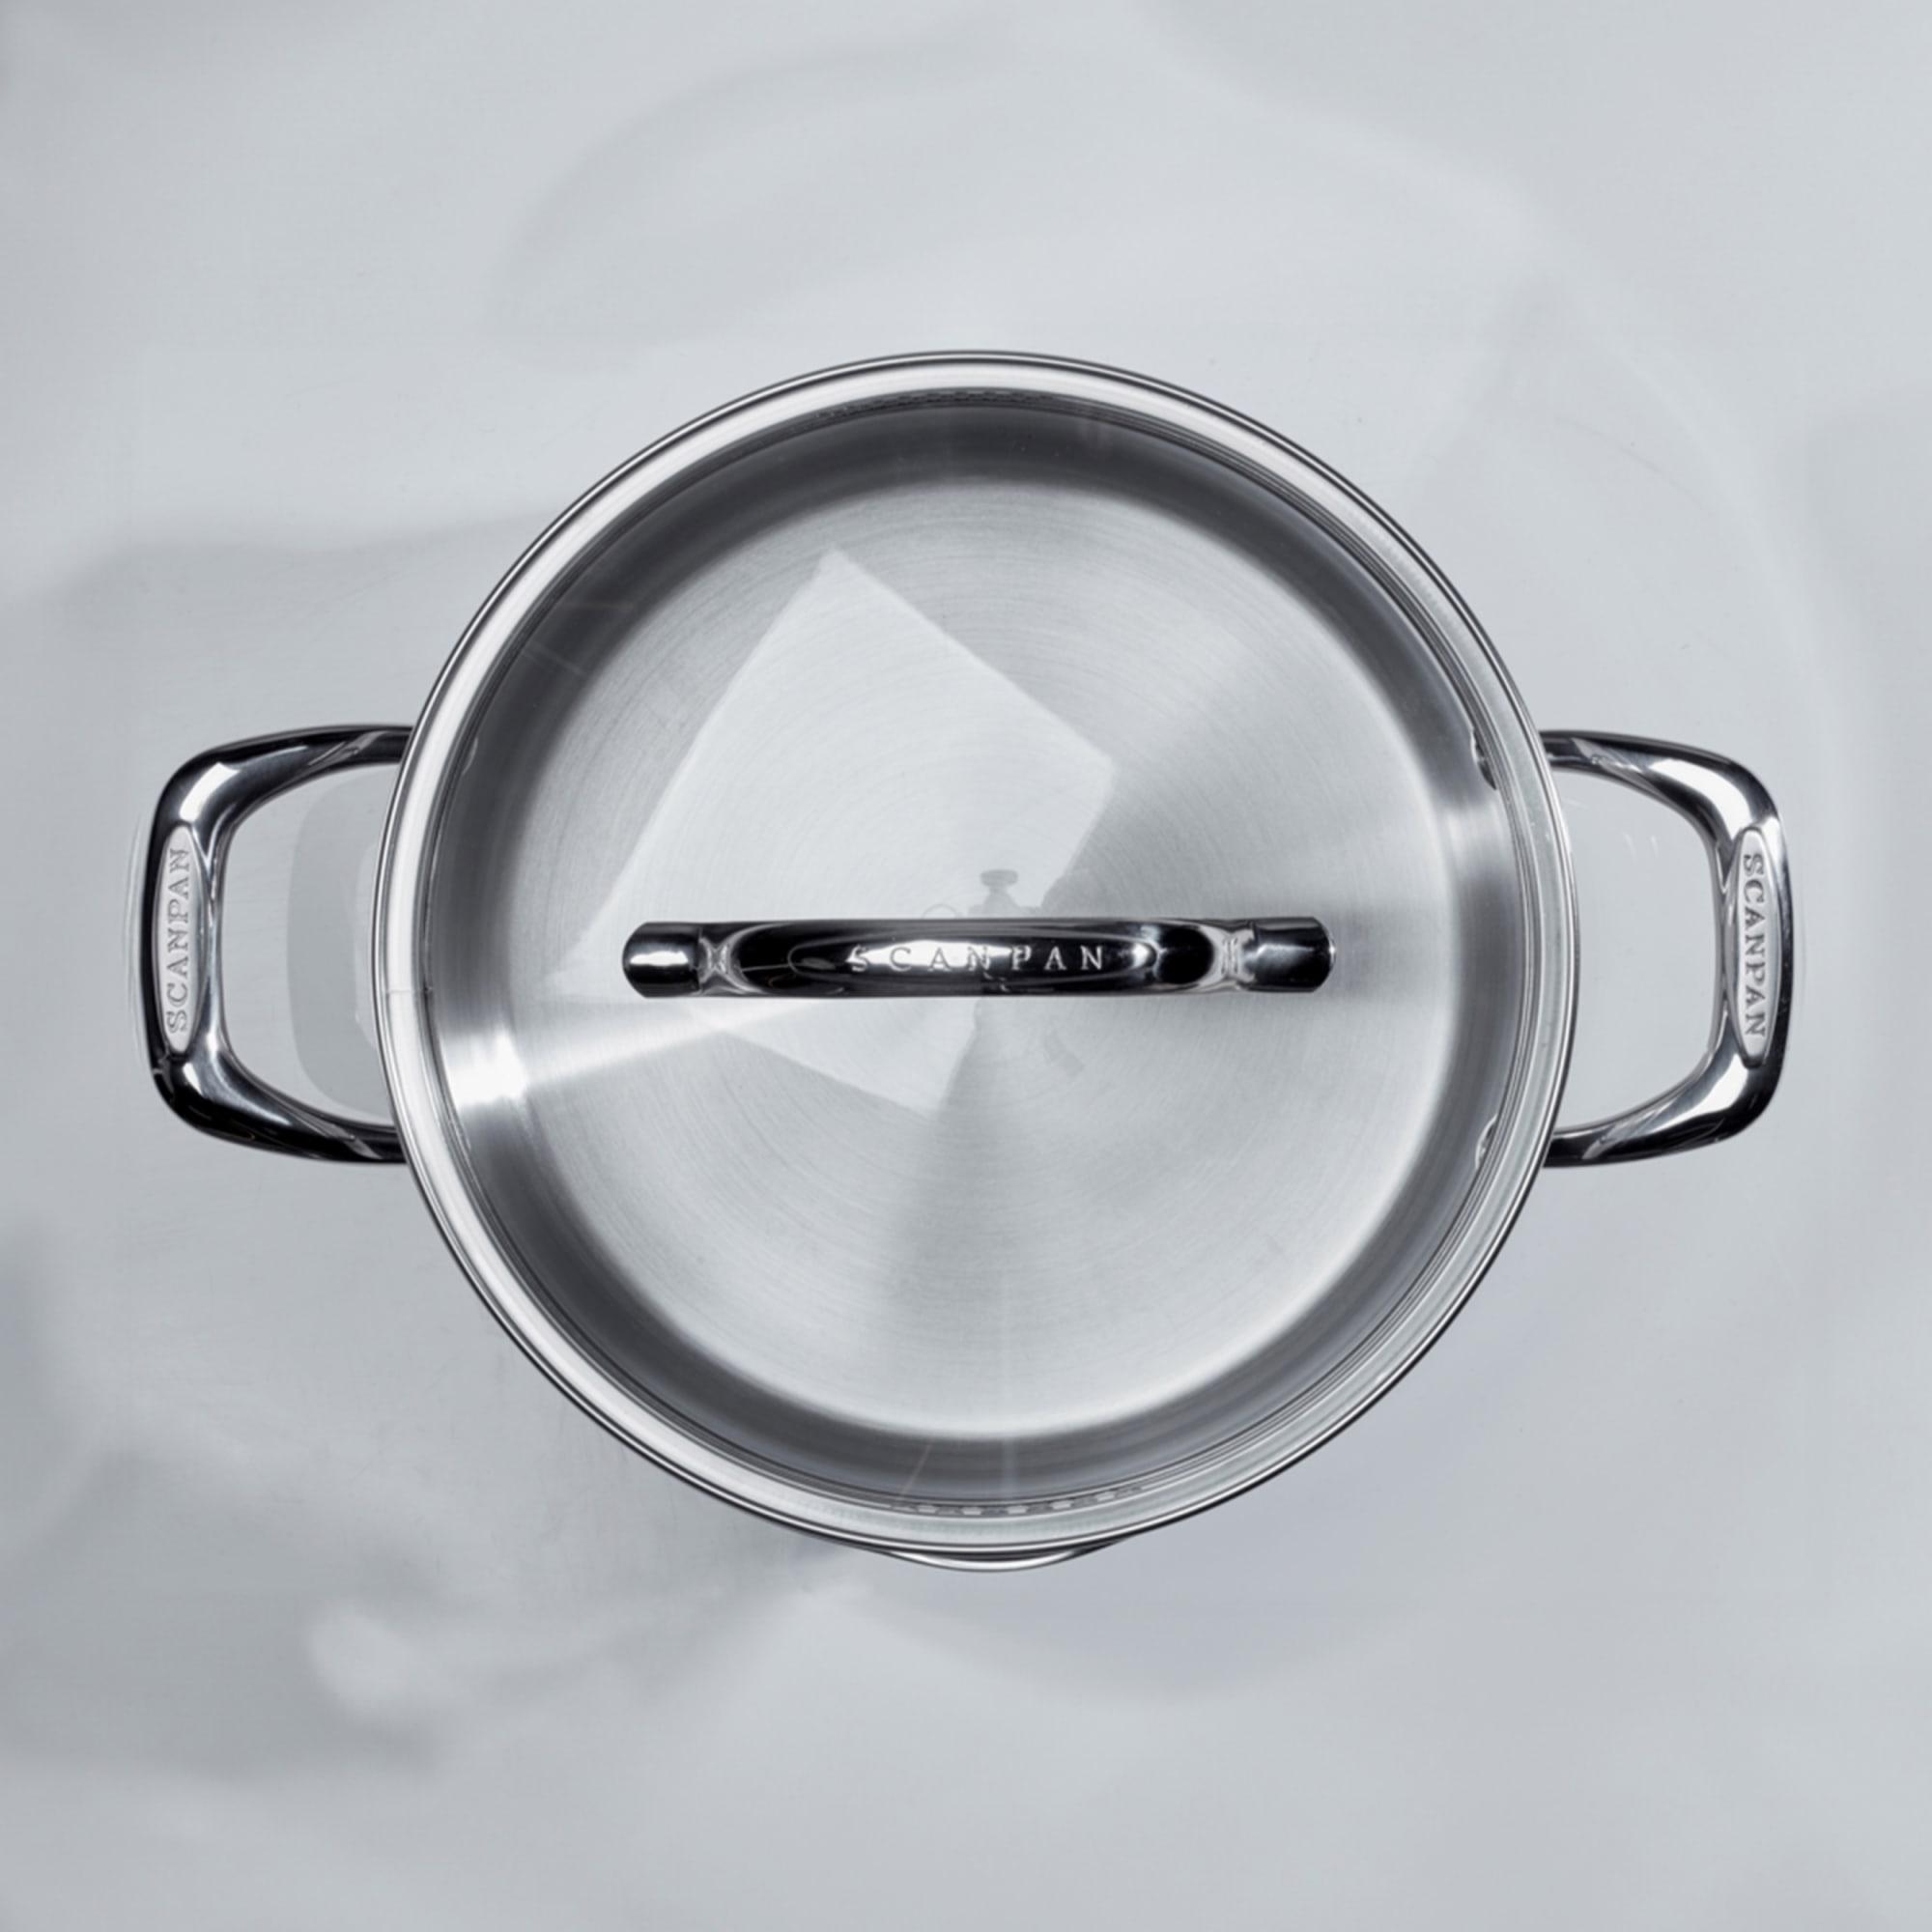 Scanpan STS 5pc Stainless Steel Cookware Set Image 6